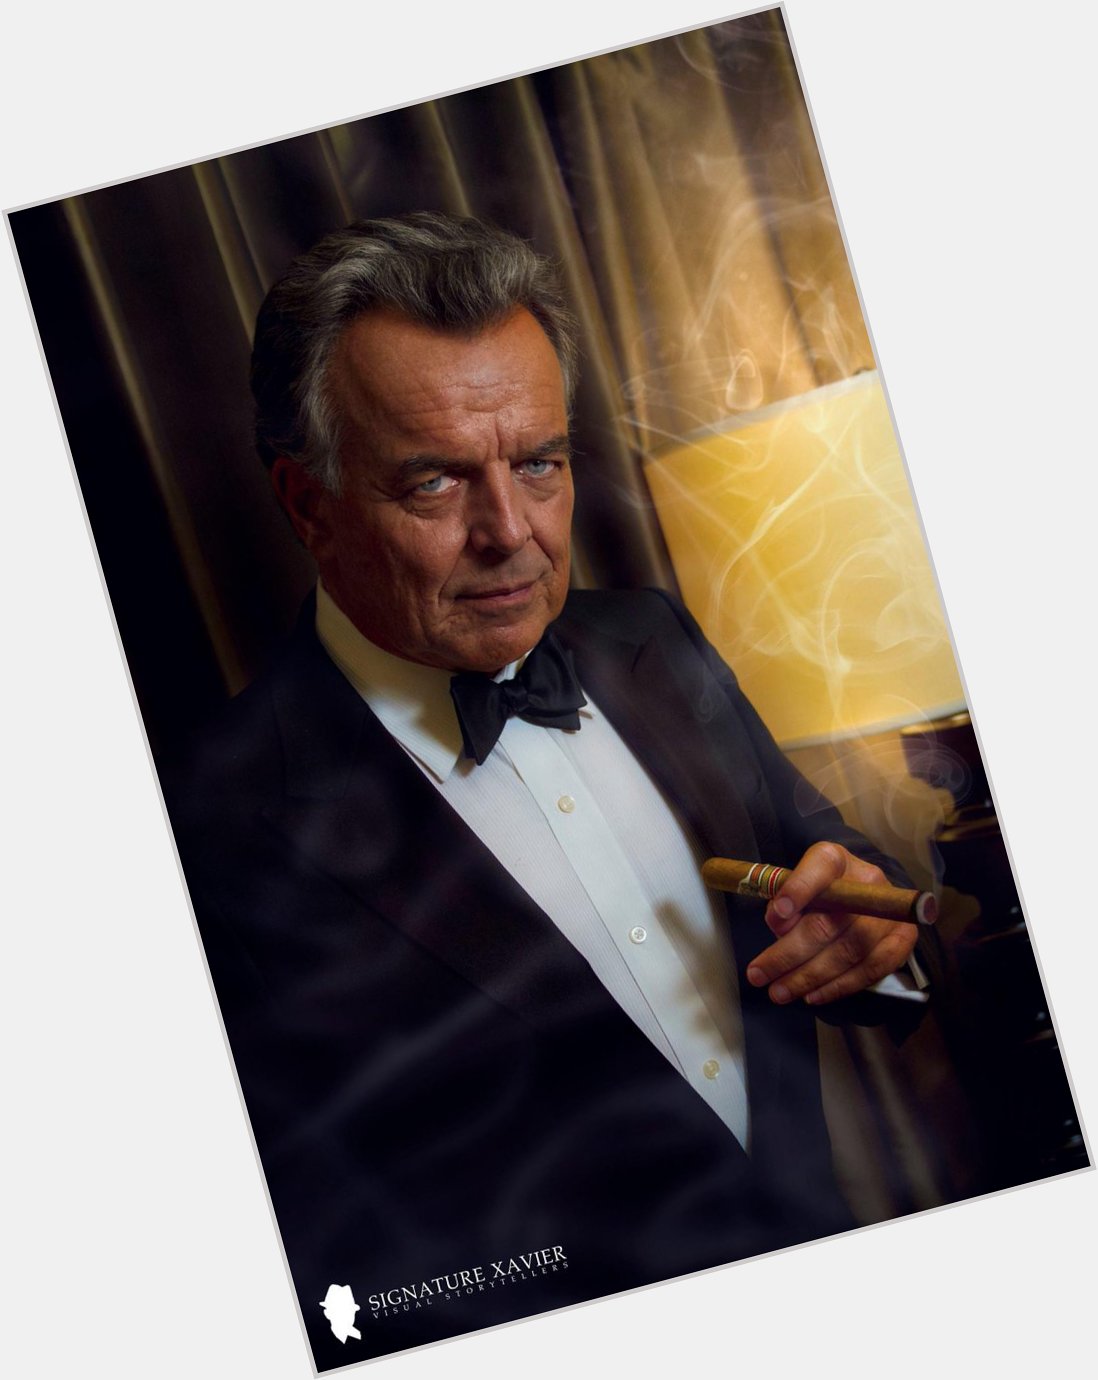 Happy birthday, Ray Wise!

Photo of by 